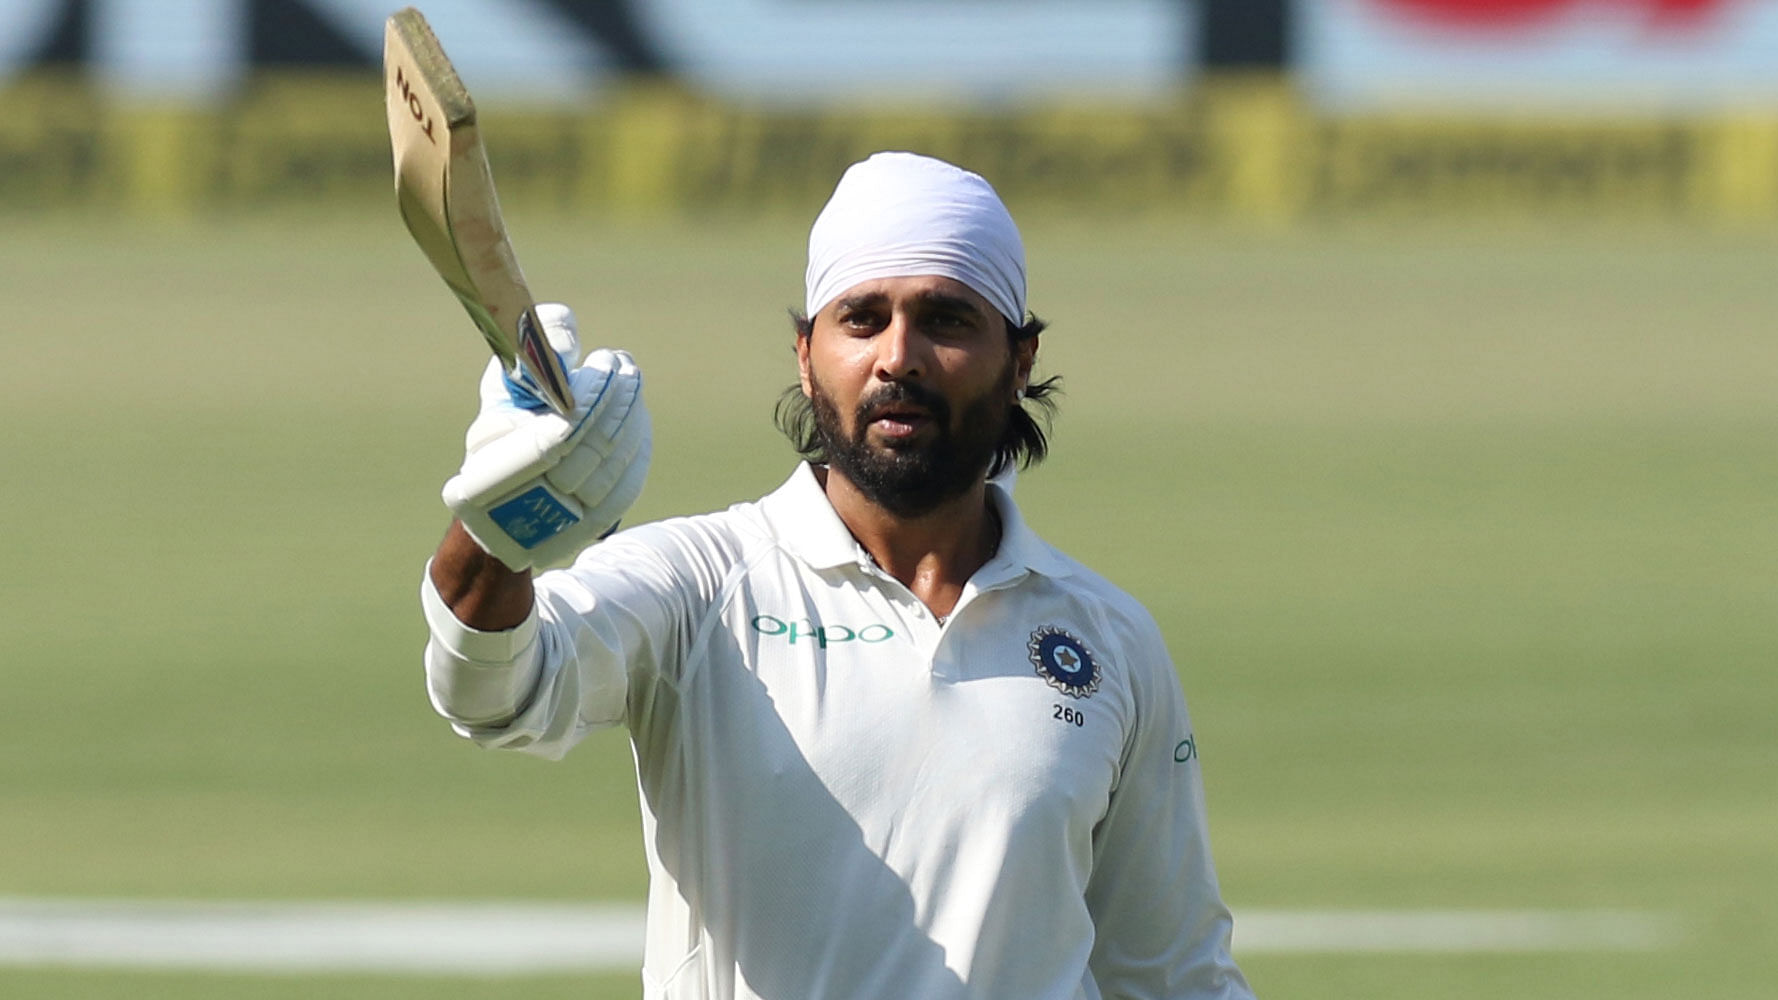 Murali Vijay raises his bat after scoring a century on Day 2 of the second Test against Sri Lanka in Nagpur on Saturday.